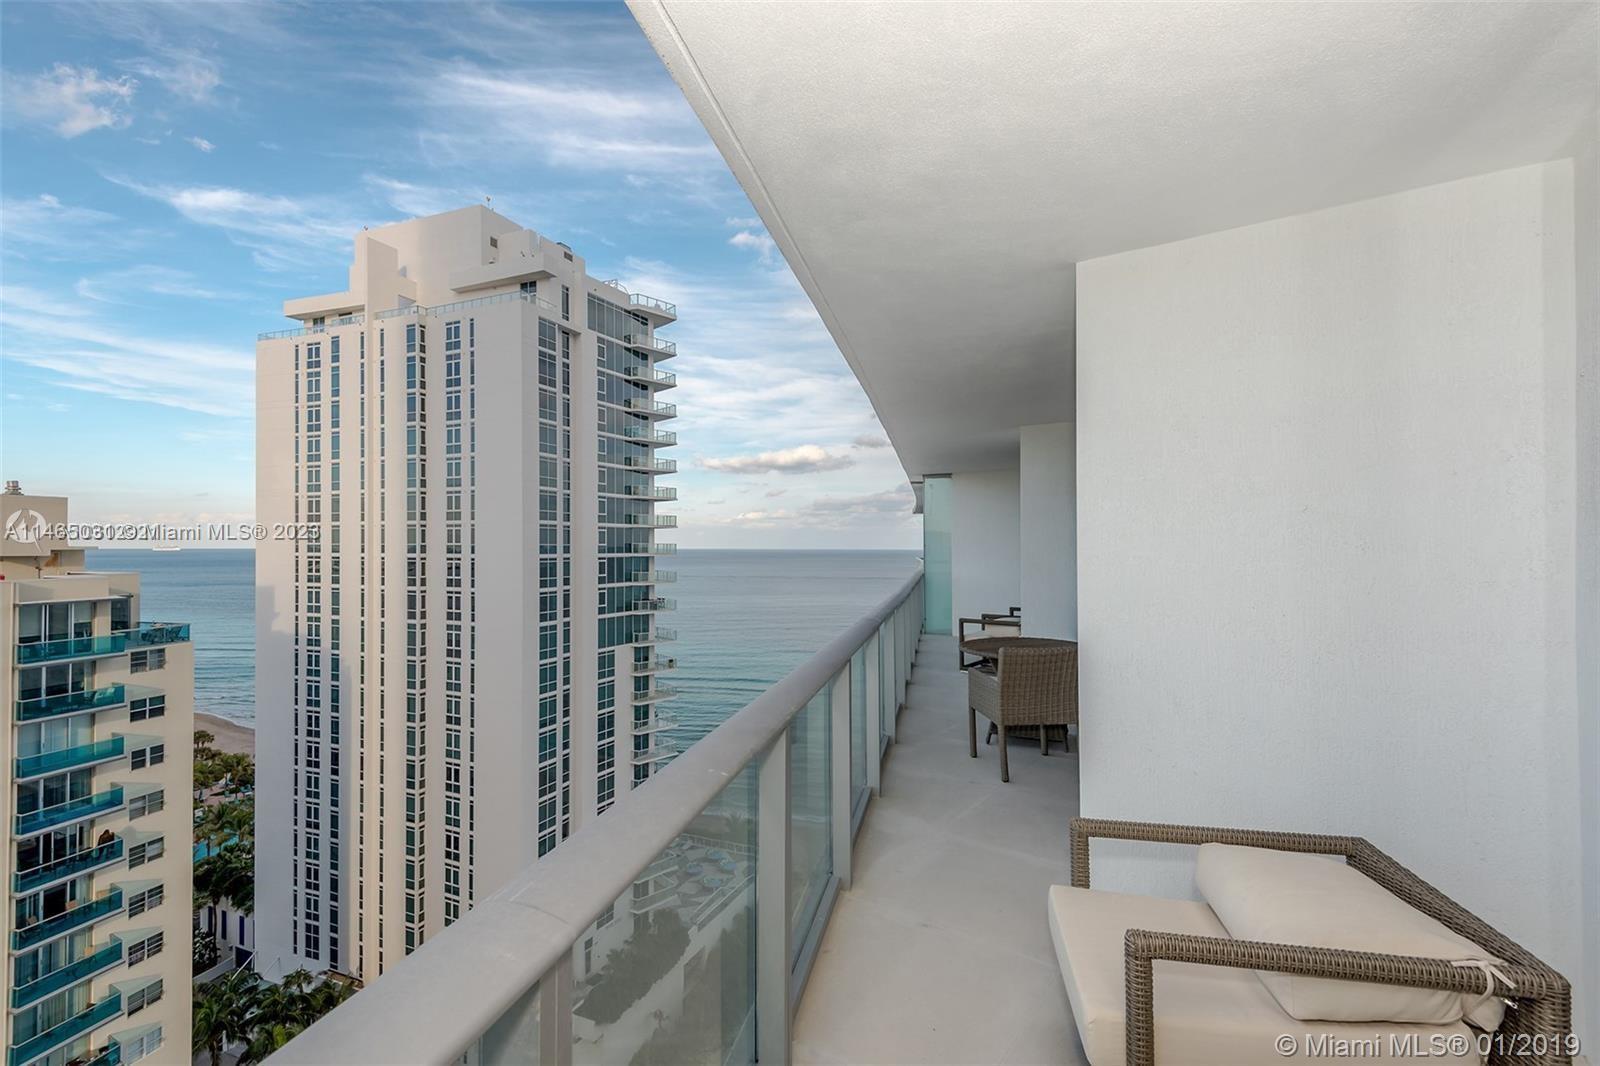 Photo of 4111 S Ocean Dr #1604 in Hollywood, FL